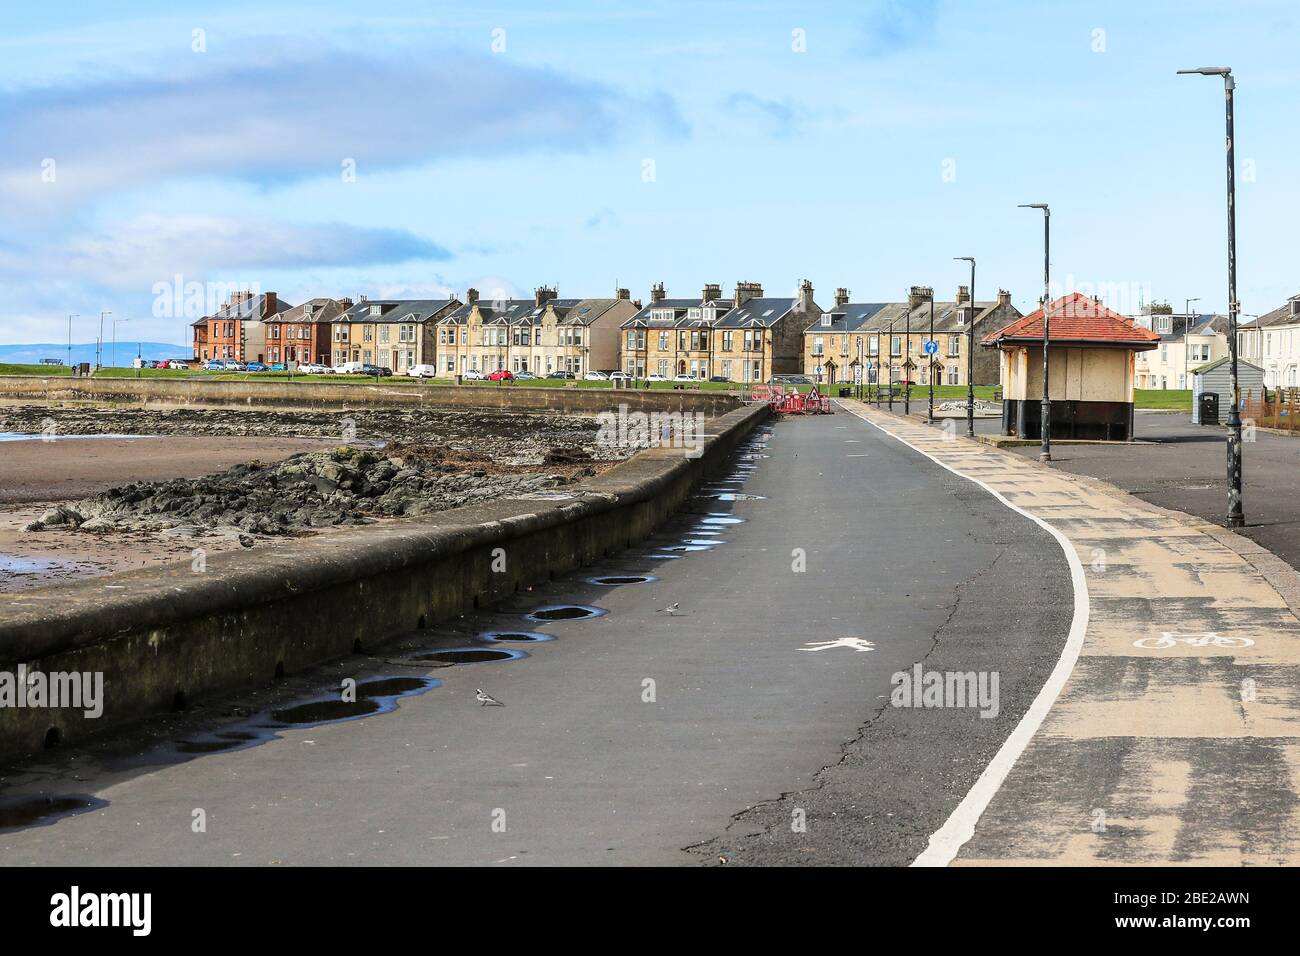 Troon, UK. 11 April 2020. On what would normally be one of the busiest weekends of the year, Easter weekend, it appears that people are taking the Government's advice and staying at home and not travelling to tourist destinations. Troon beach, on Easter weekend would normally be the preferred choice for thousands of tourists and day trippers  who might travel considerable distances to enjoy the resort. Credit: Findlay/ Alamy News Stock Photo